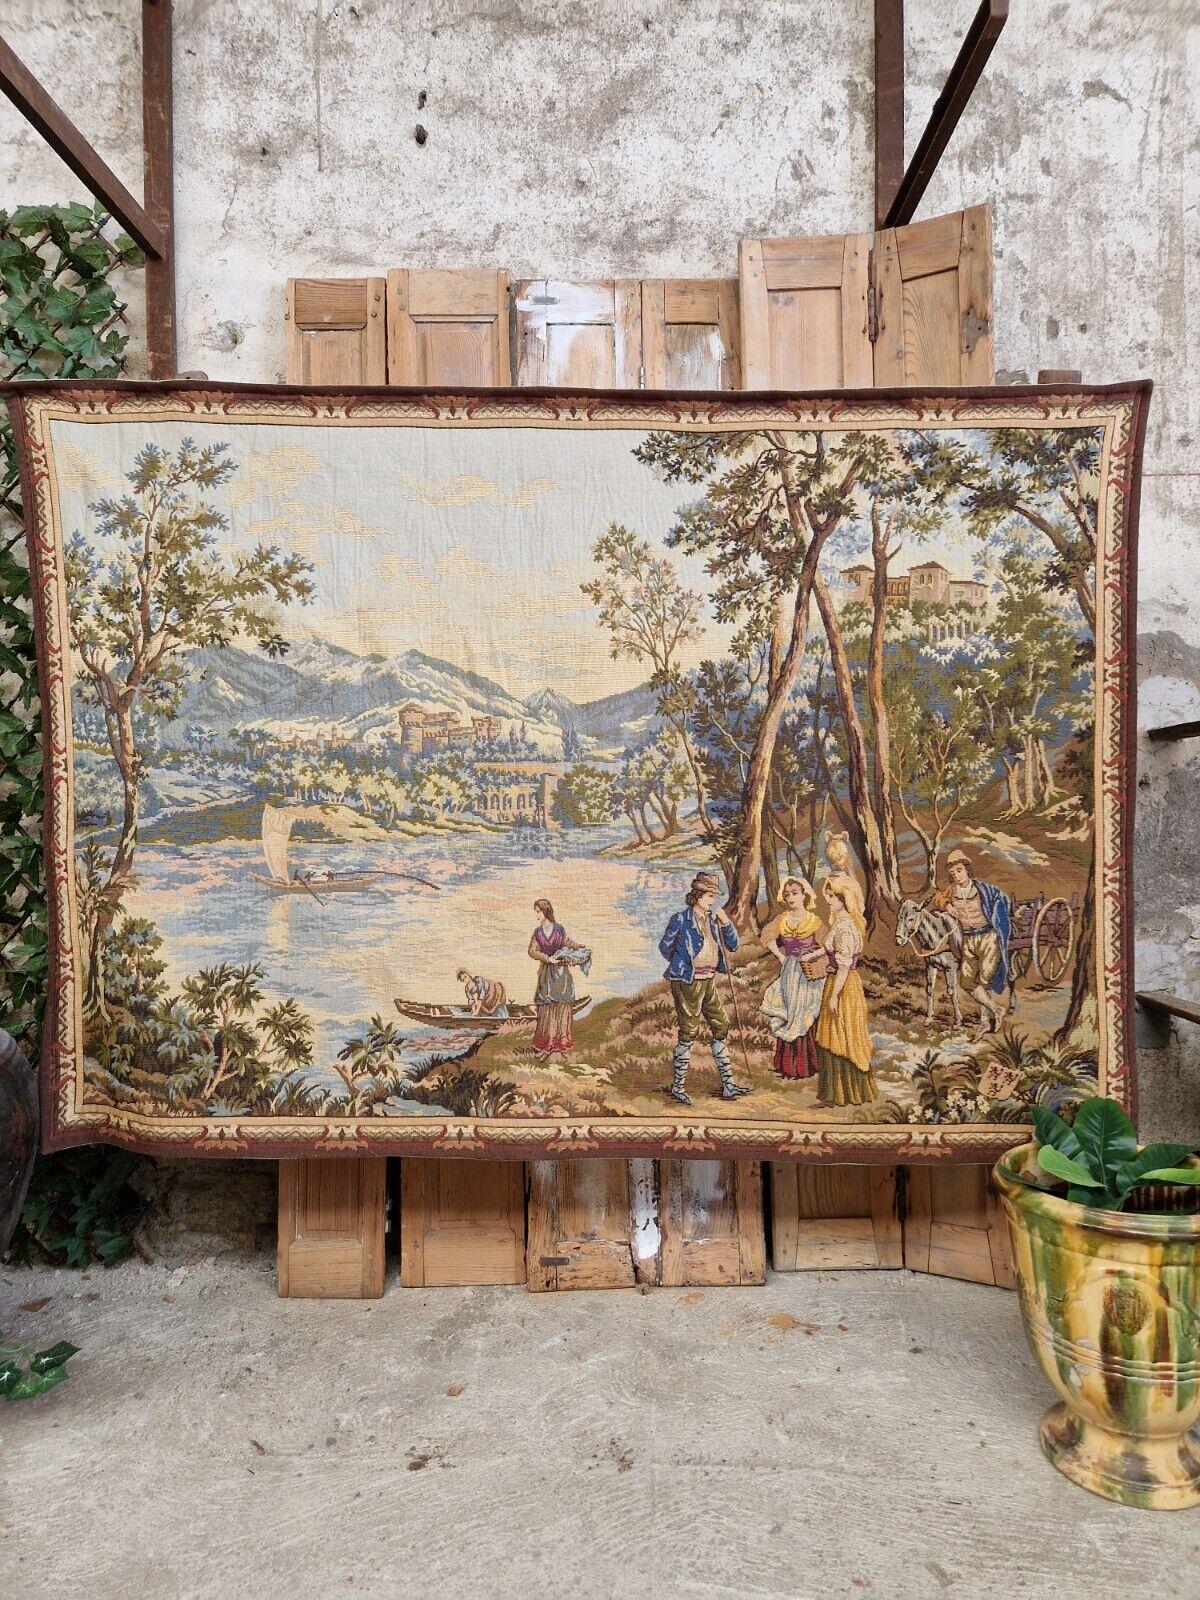 This beautiful and unique Aubusson tapestry is a stunning piece of French history. Measuring at 126 x 181 cm, it is large enough to make a statement in any room. The multicoloured gallant scene is intricately woven with cotton material, making it